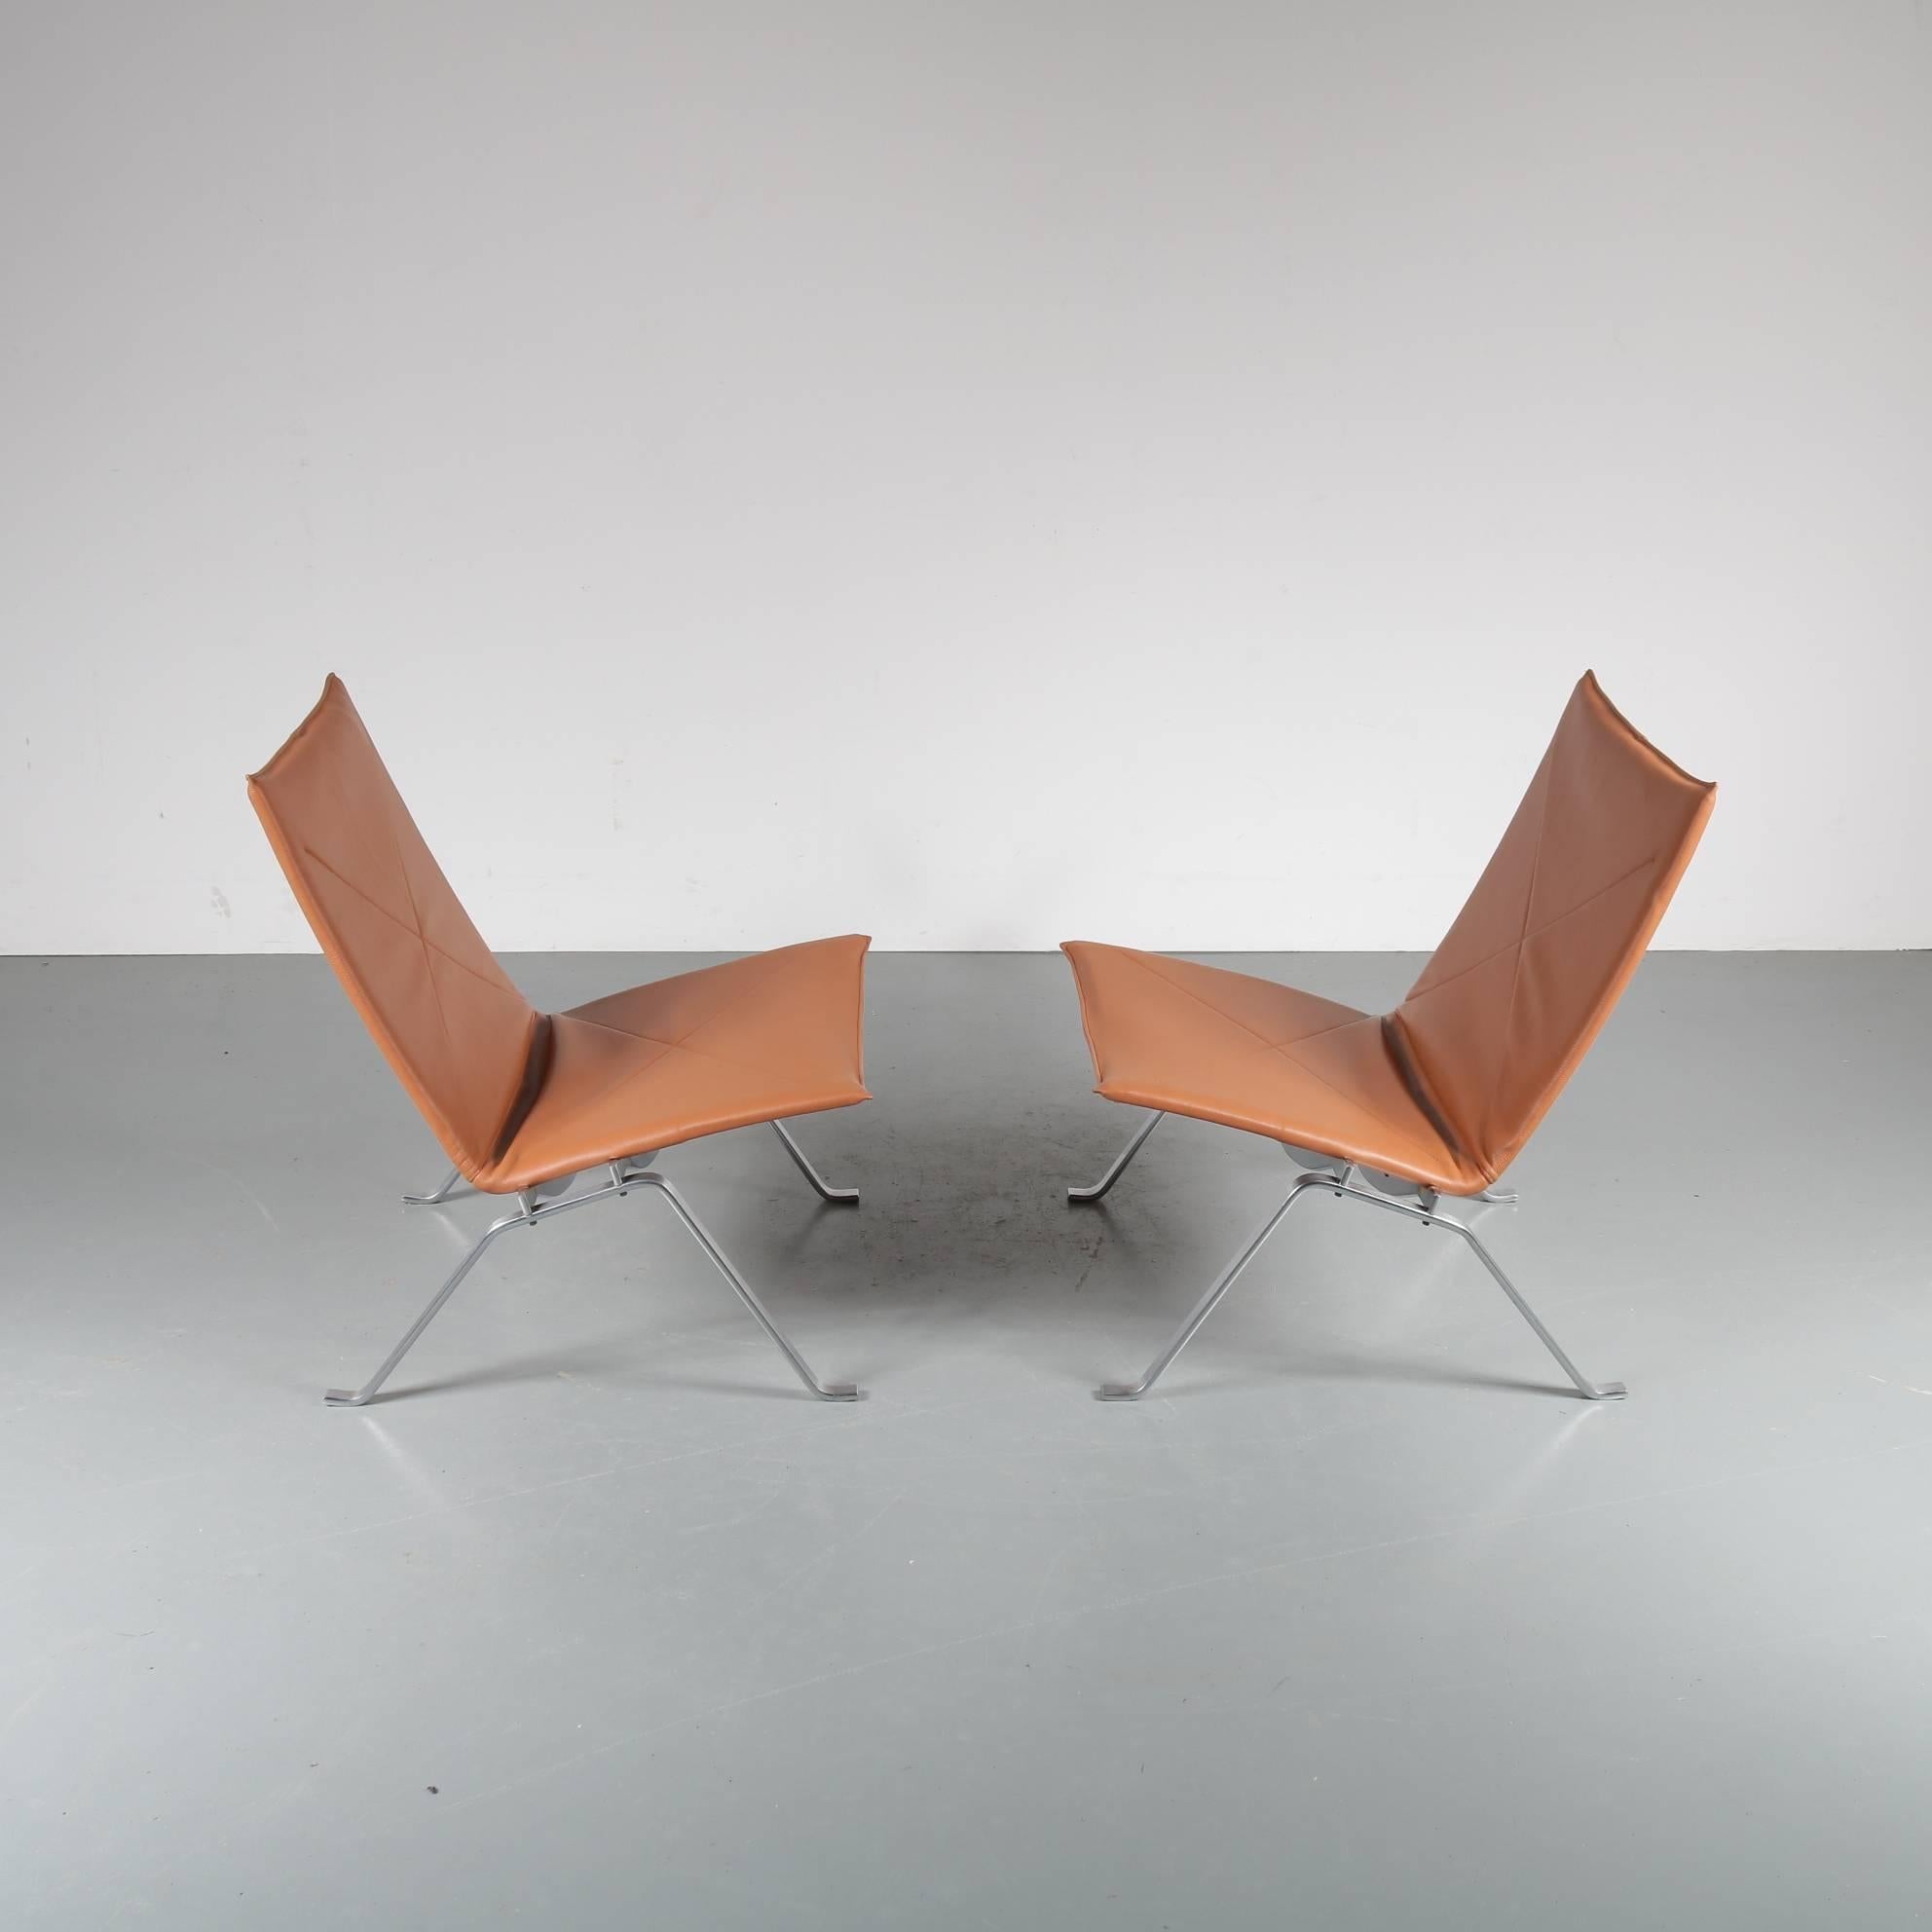 A stunning pair of PK22 lounge chairs, designed by Poul Kjaerholm, manufactured by E. Kold Christensen in Denmark, circa 1960.

The chair has a beautiful chrome-plated metal base. It is newly upholstered in high quality aniline leather in a